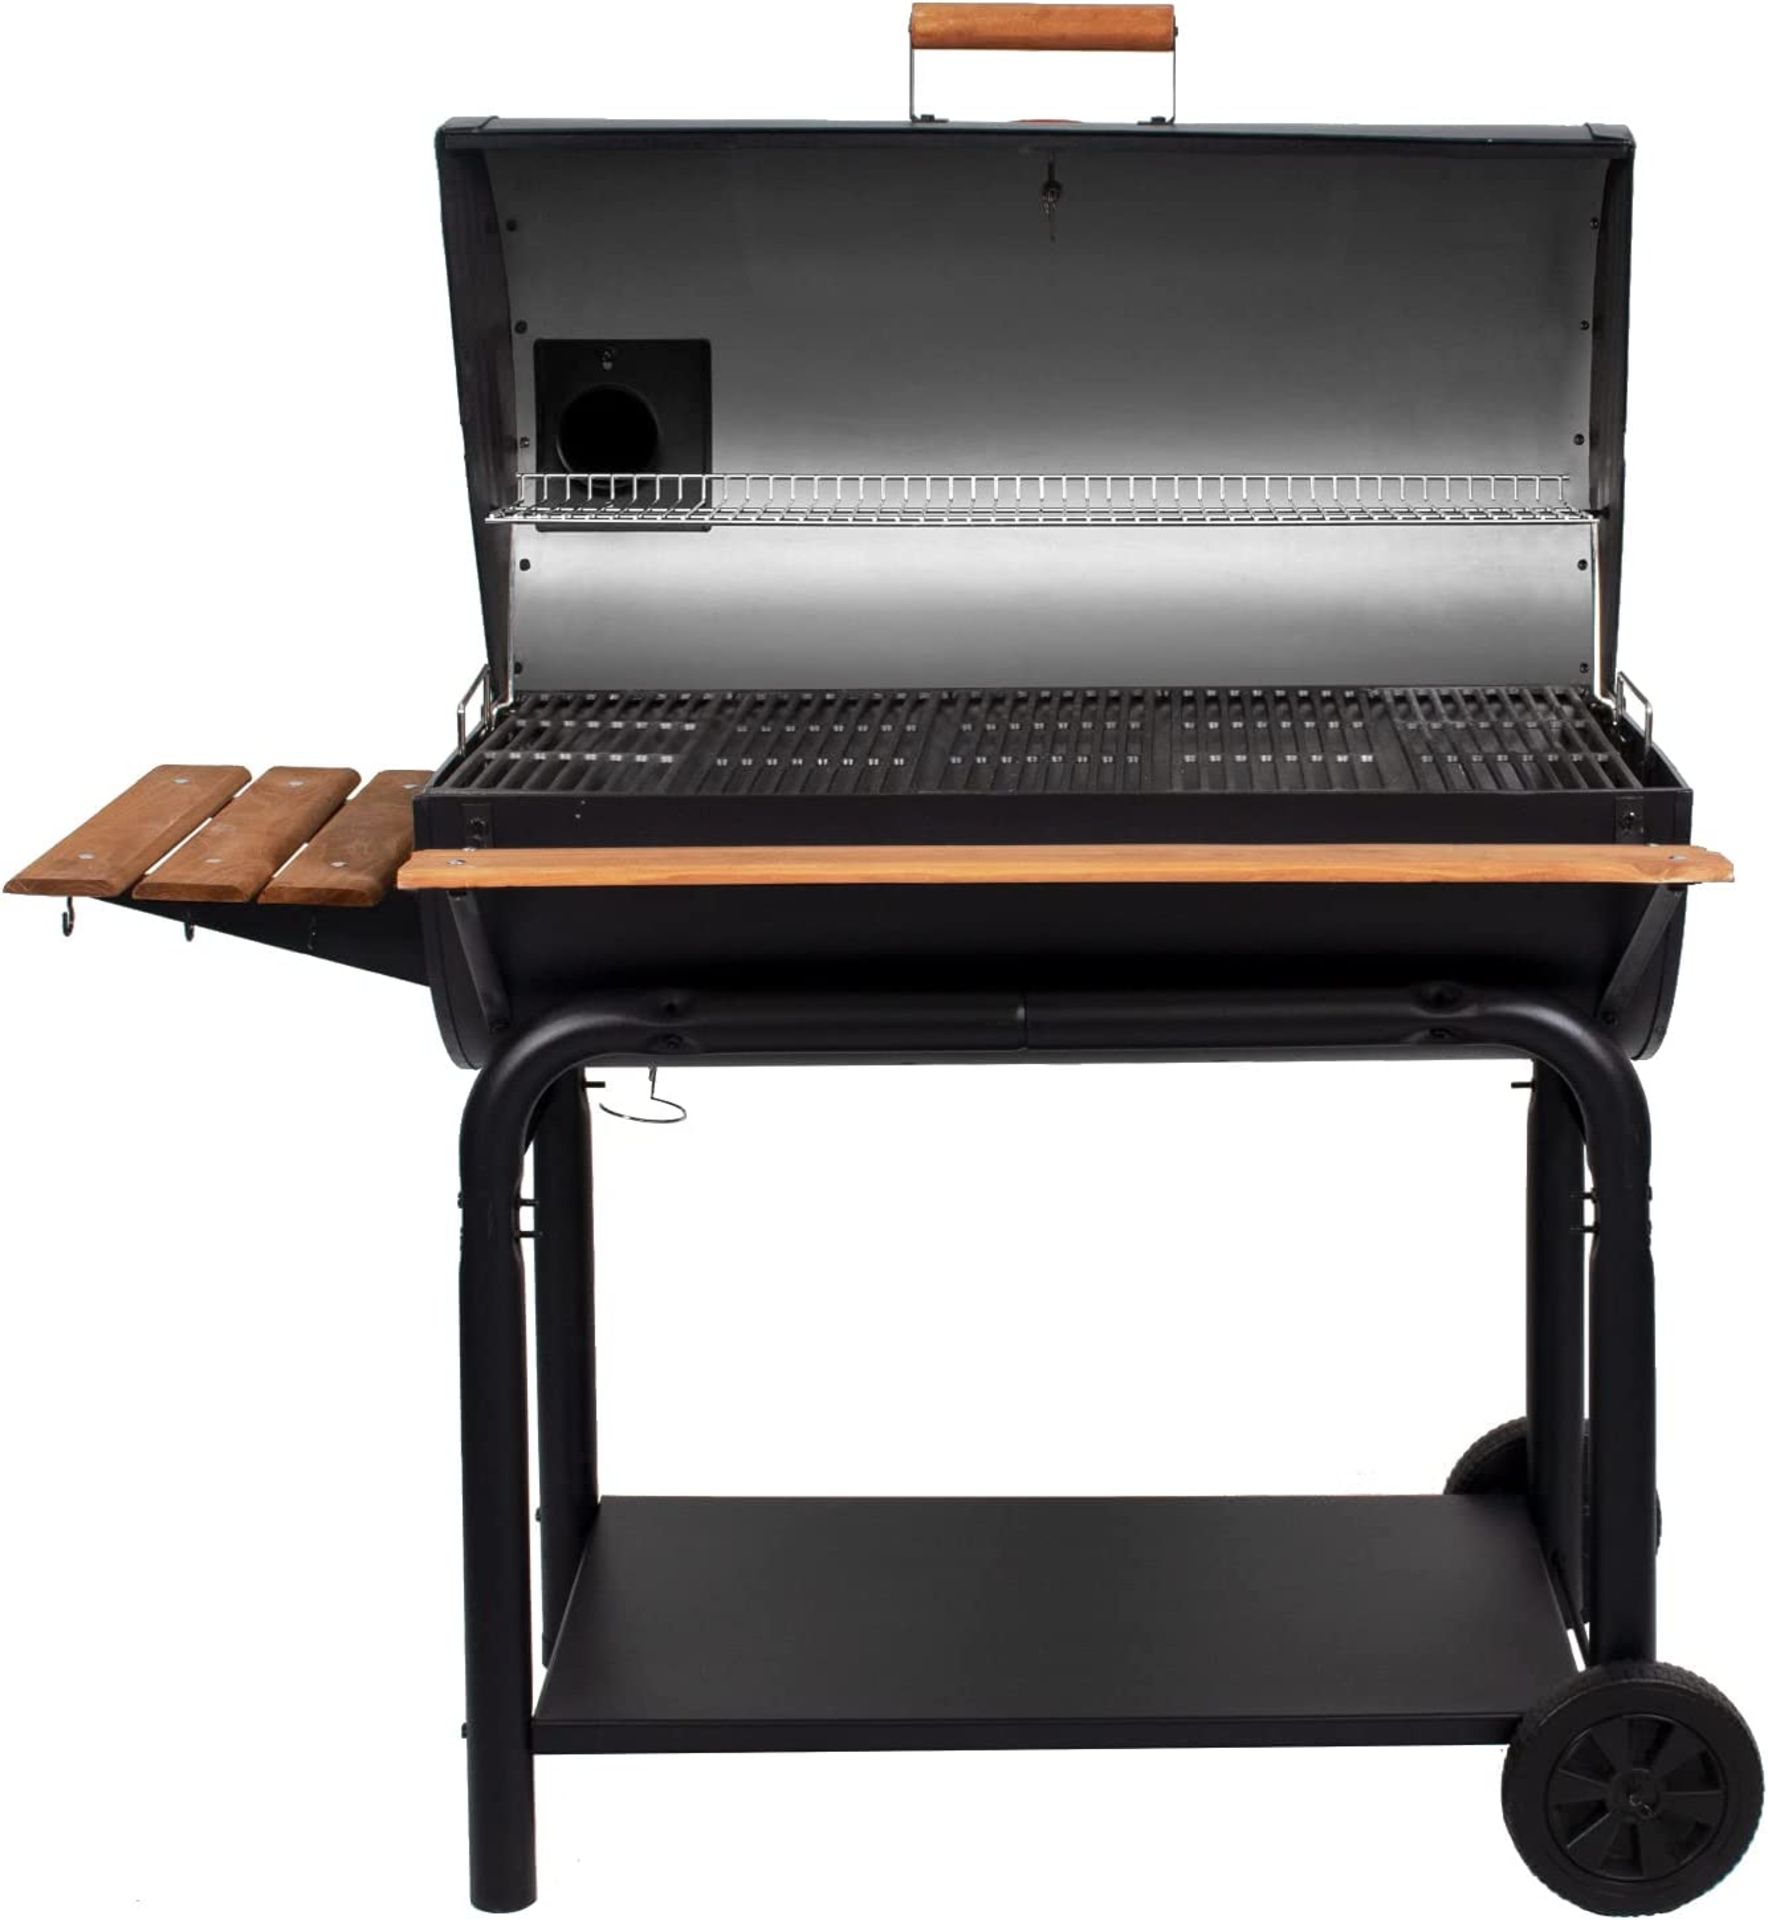 BRAND NEW CHAR GRILLER 2137 OUTLAW 1038 SQUARE INCH CHARCOAL GRILL/SMOKER - Image 10 of 12